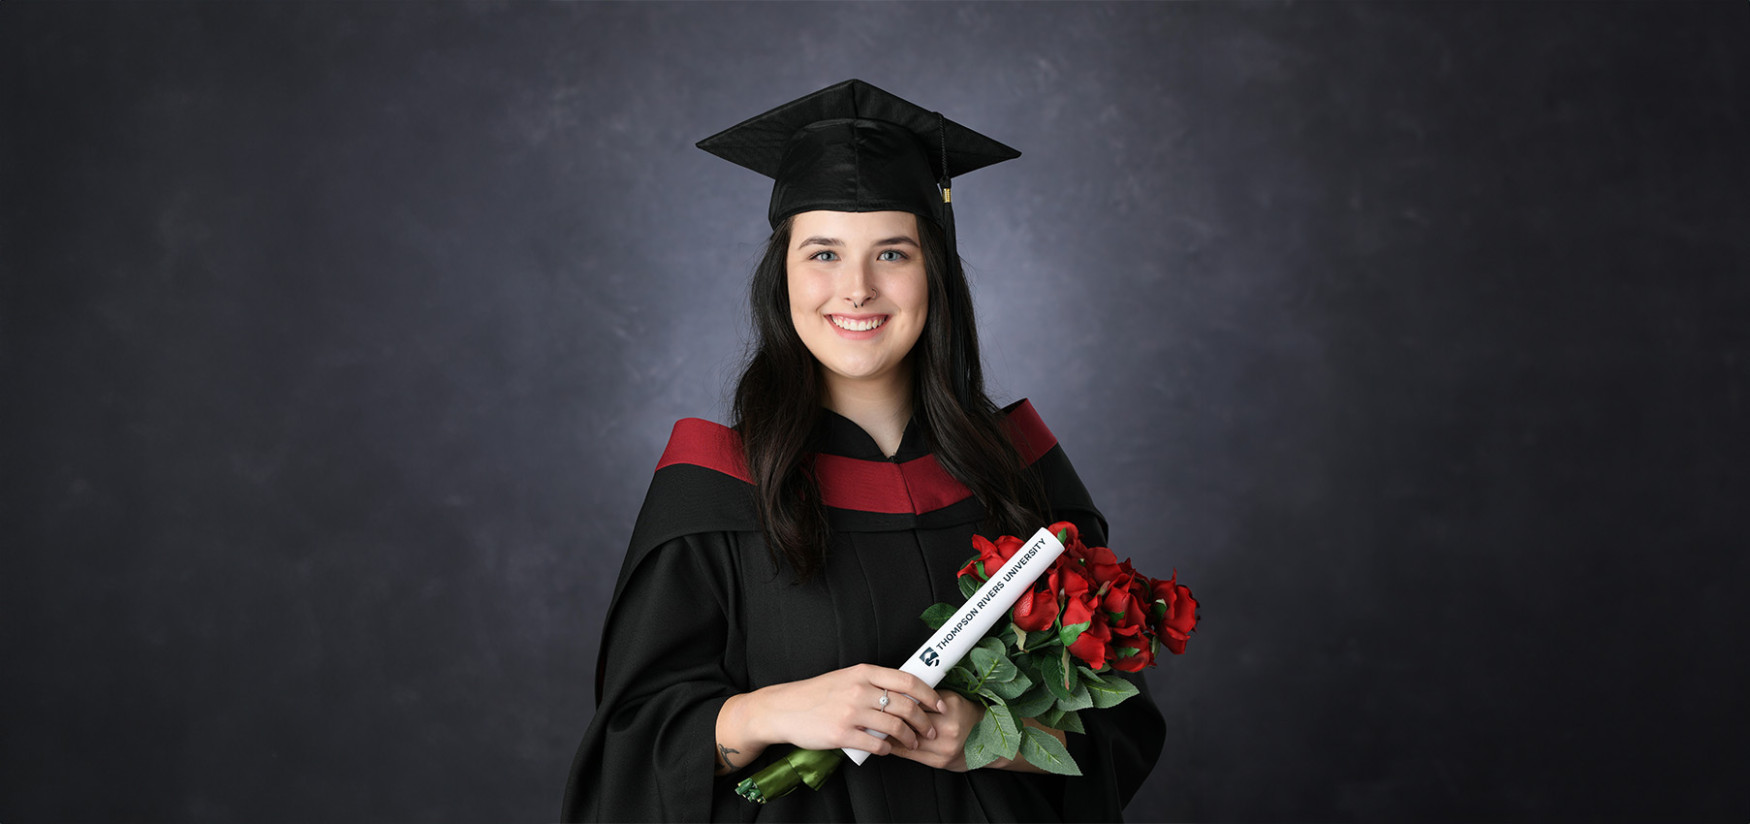 Third time’s the charm for TRU education student – TRU Newsroom